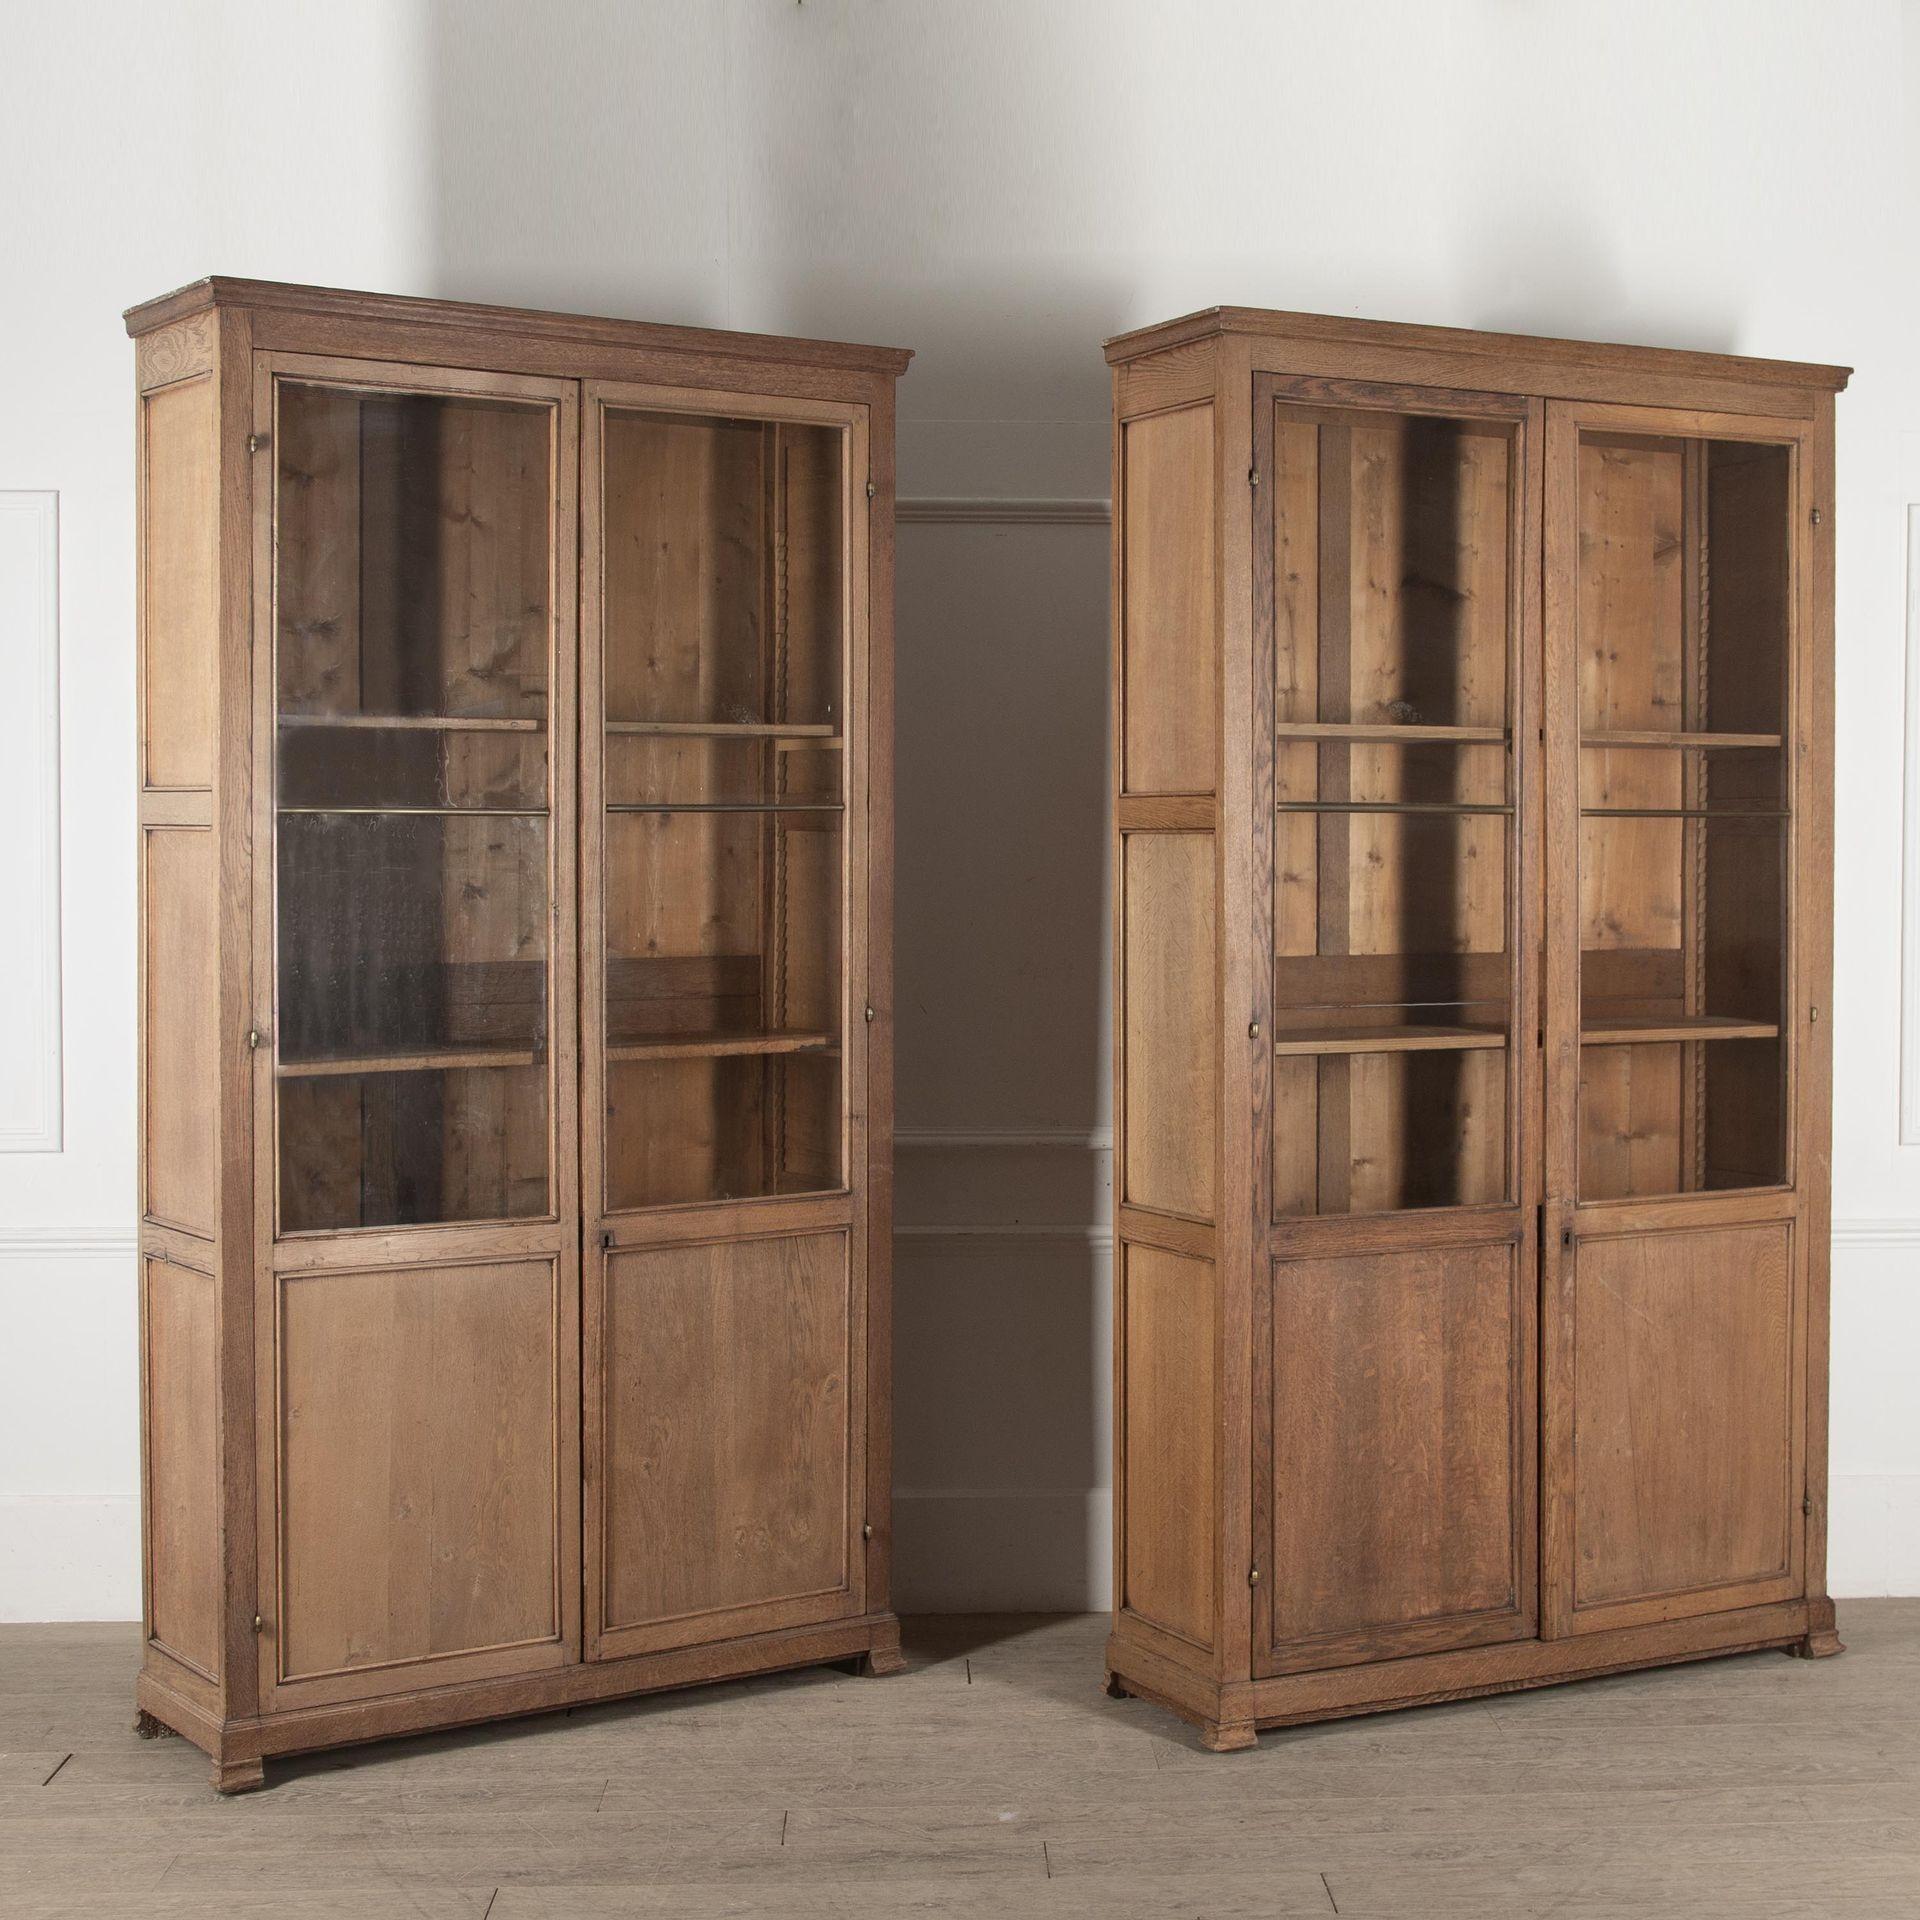 Pair of 19th Century Tall Oak Bookcases 4